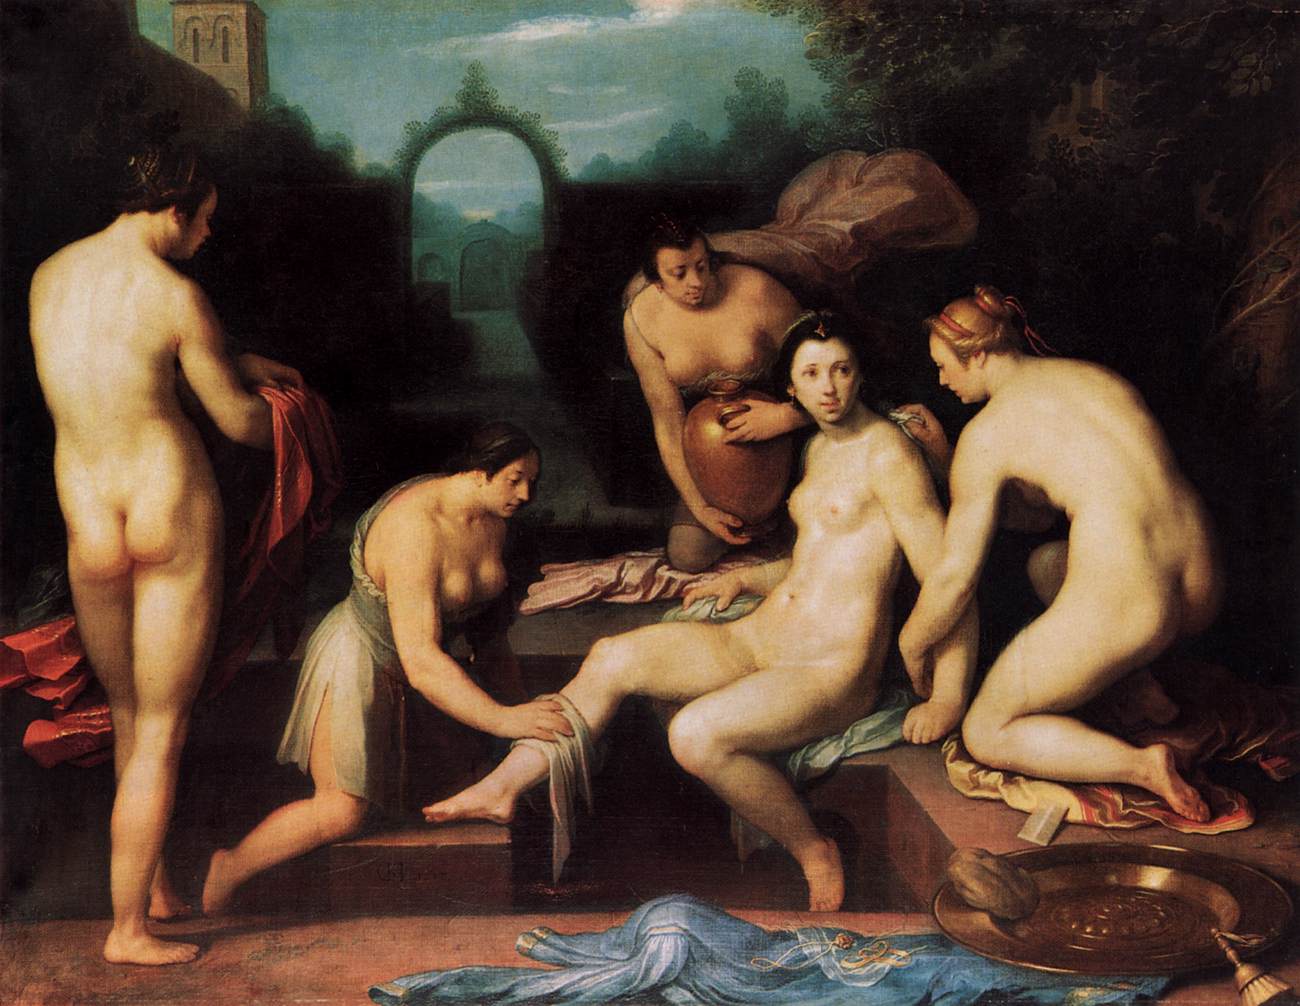 Old painting of a woman being washed by several other people